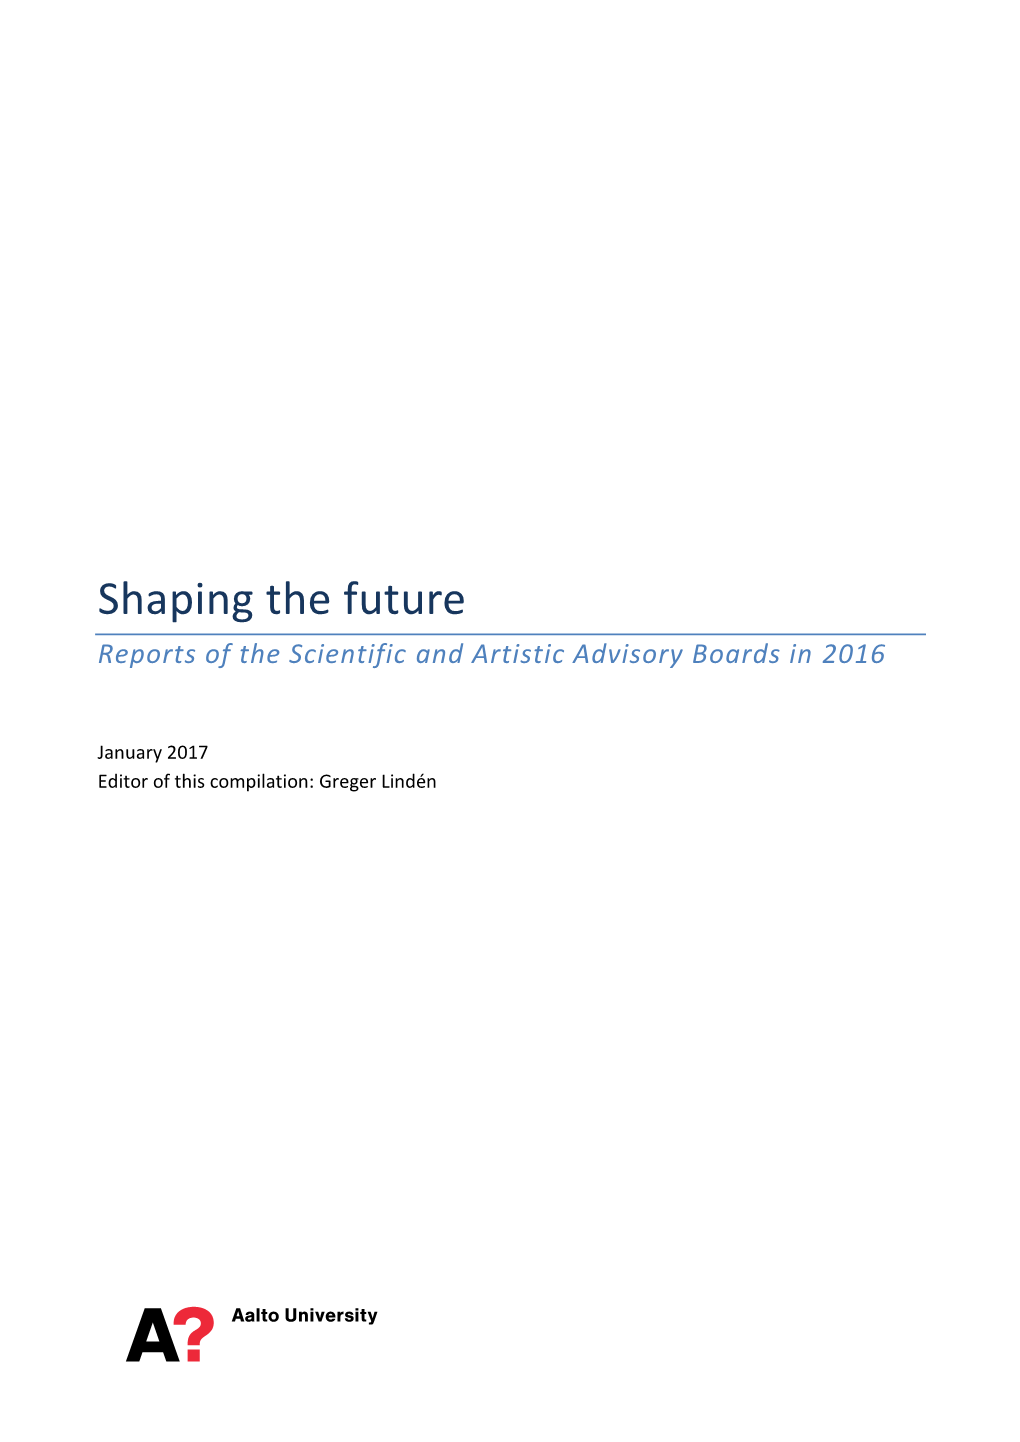 Shaping the Future Reports of the Scientific and Artistic Advisory Boards in 2016